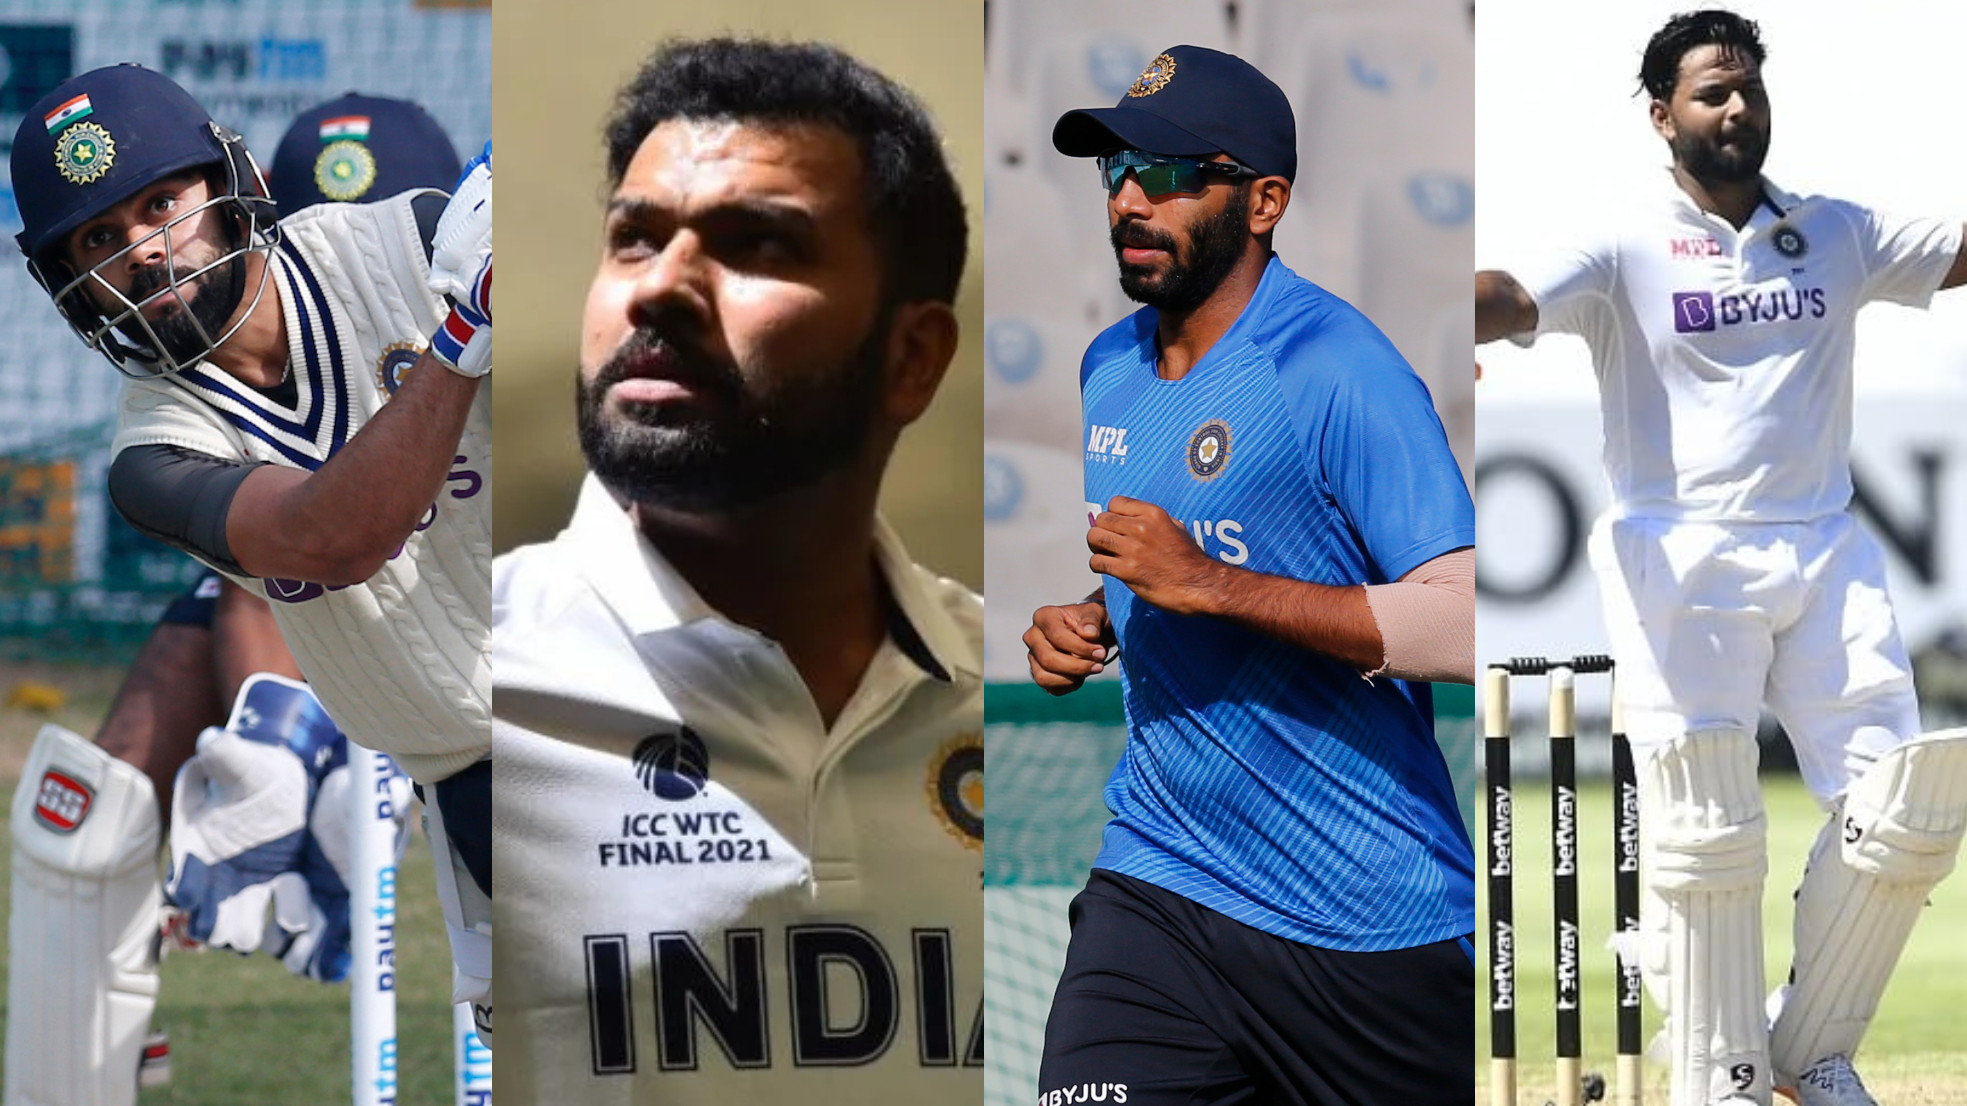 IND v SL 2022: COC predicted Team India playing XI for the first Test against Sri Lanka